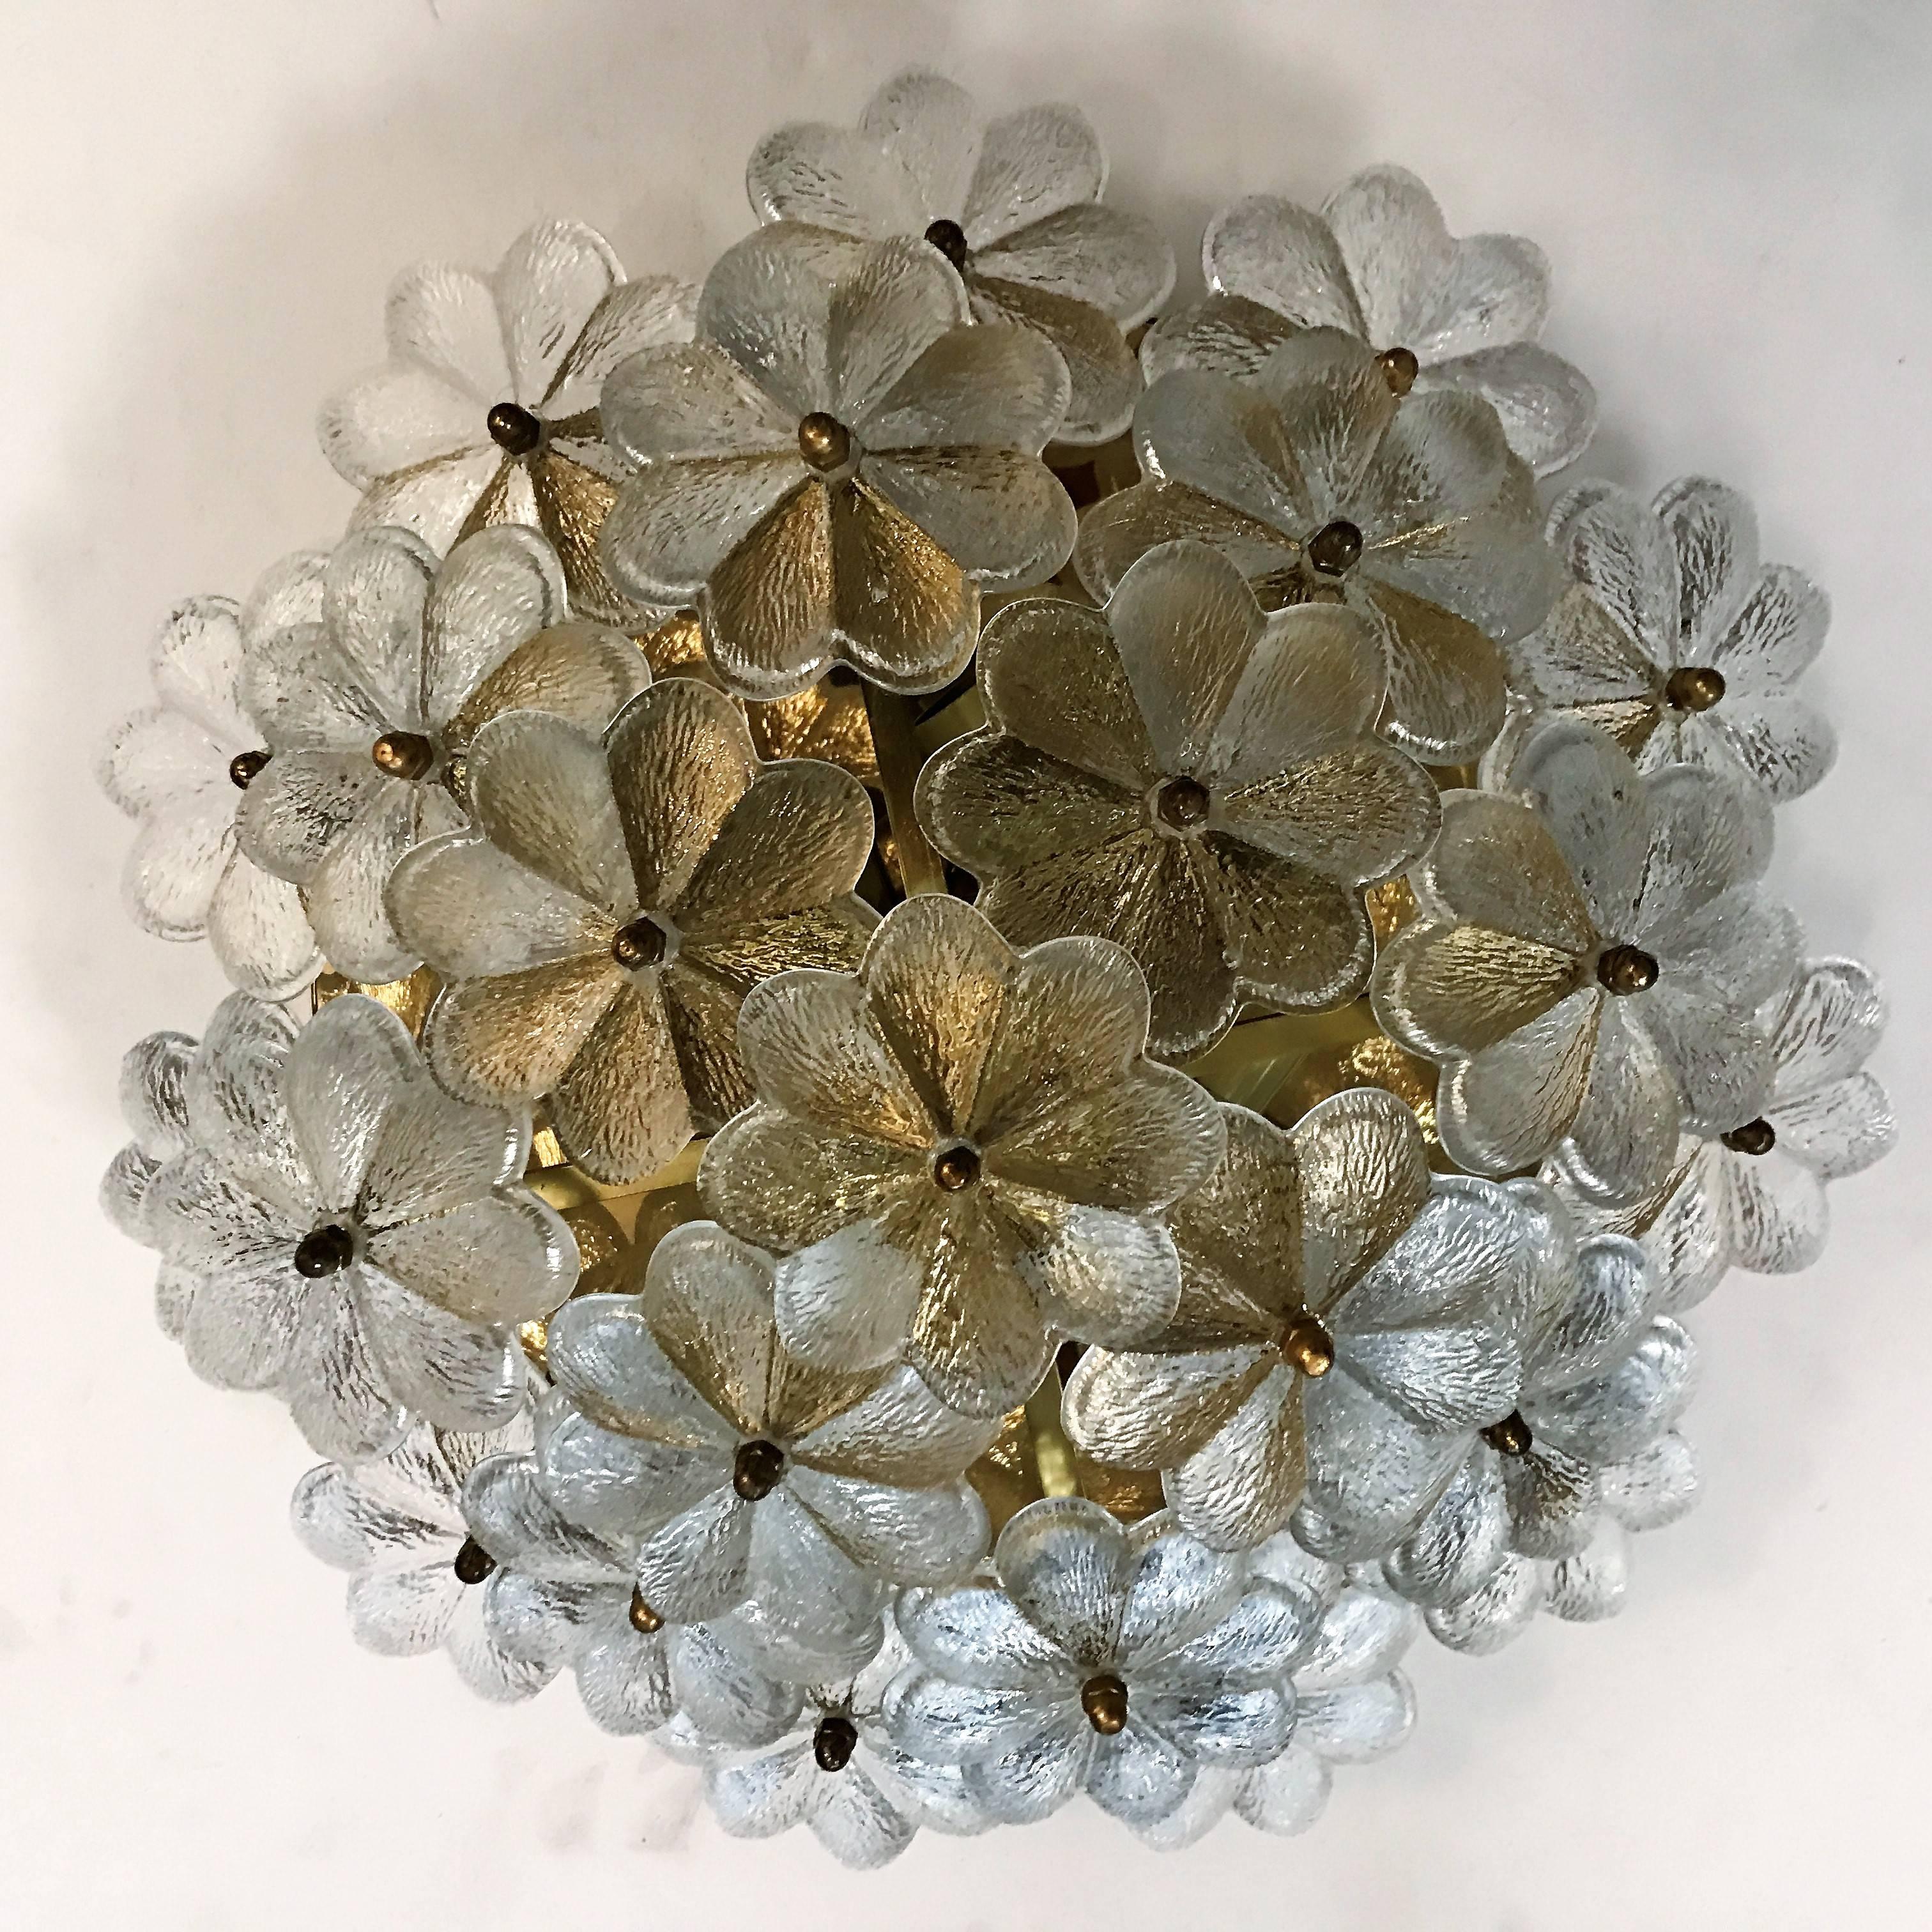 A beautiful 1960s Austrian glass floral and golden brass light fixture which can be used as a ceiling or wall light. Newly rewired. Four-light sources. Two other sizes available.